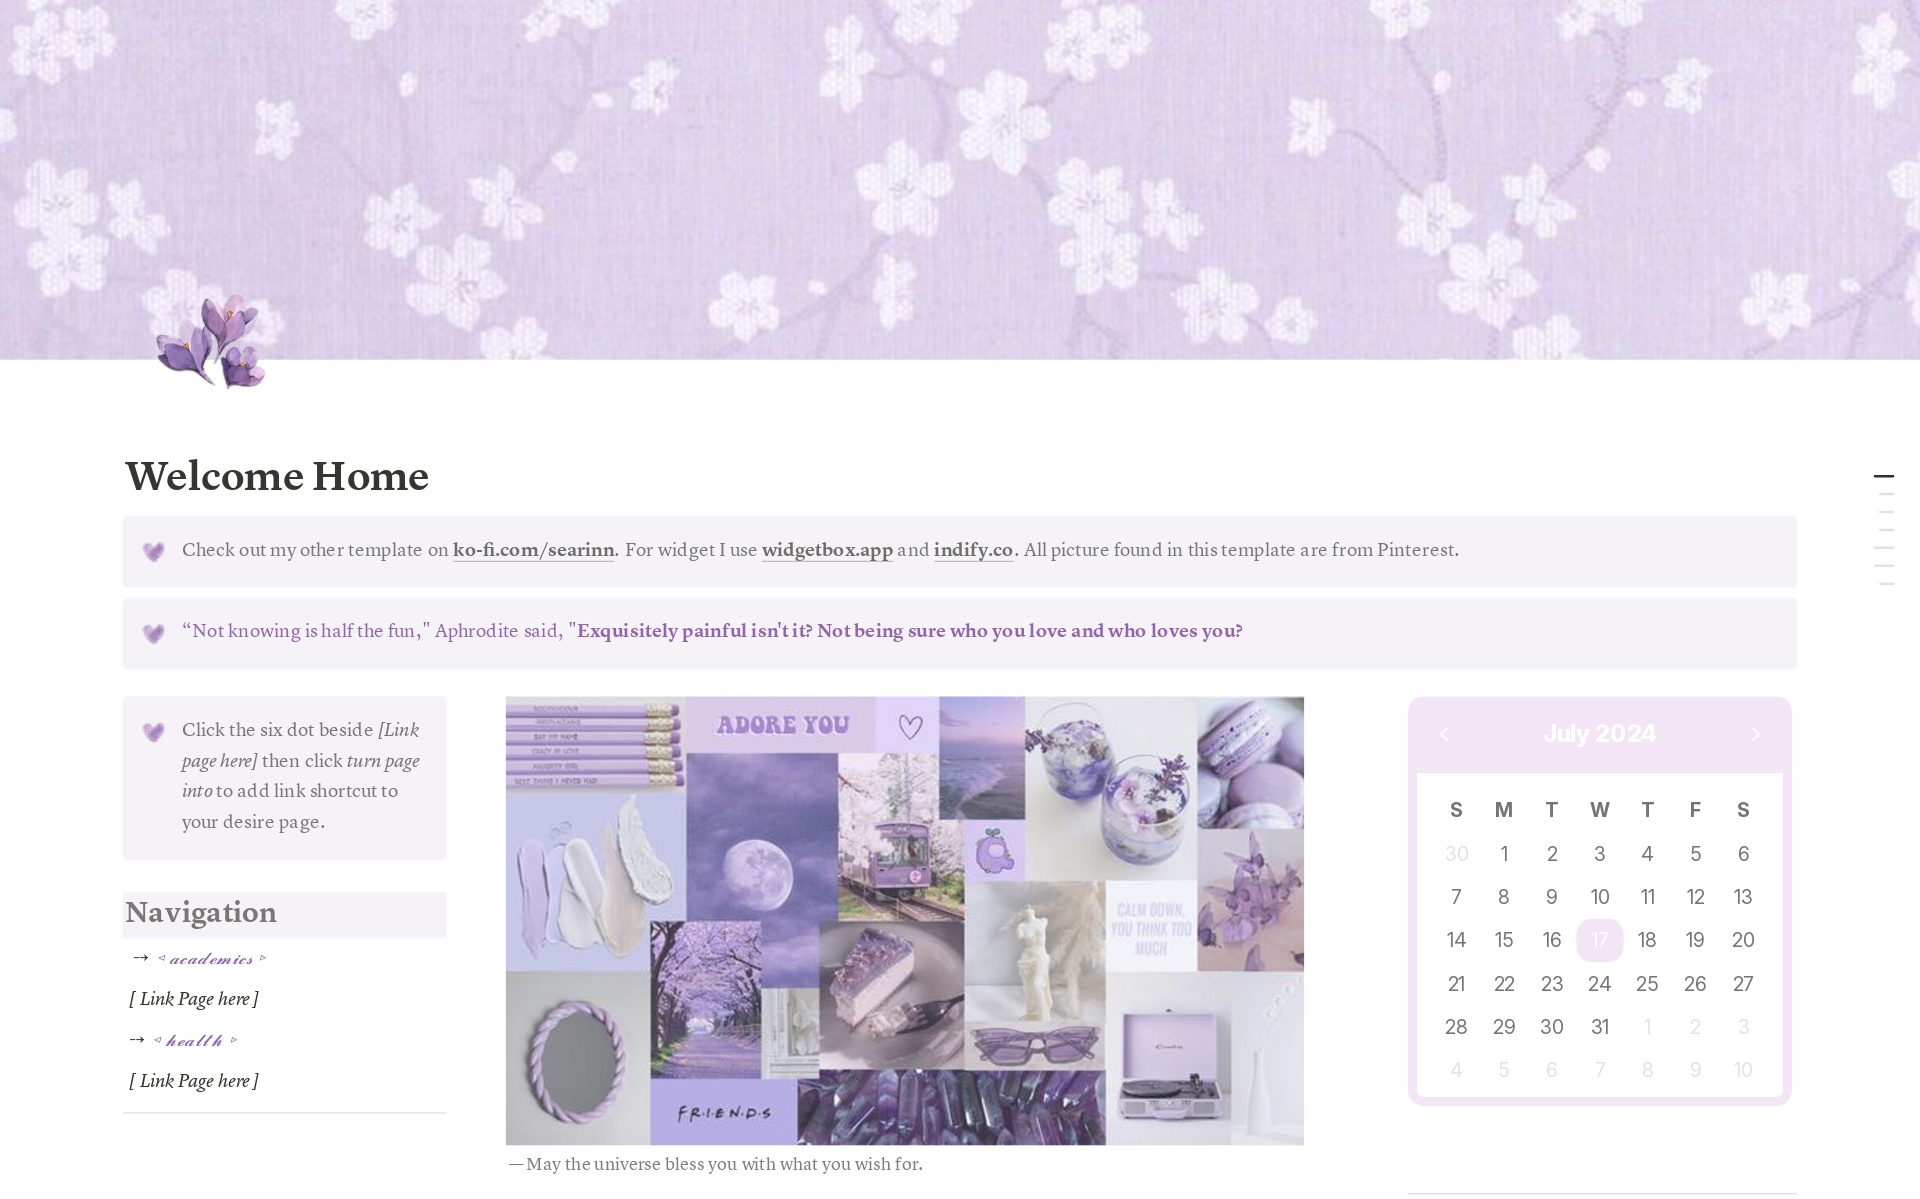 🌸 Free Lilac-Themed Dashboard with Habit Tracker and Journal 🌸
Transform your Notion with this lilac-themed dashboard! Use it as your "Main Homepage" for daily journaling and habit tracking. Link all essential pages for easy access and enhanced organization.